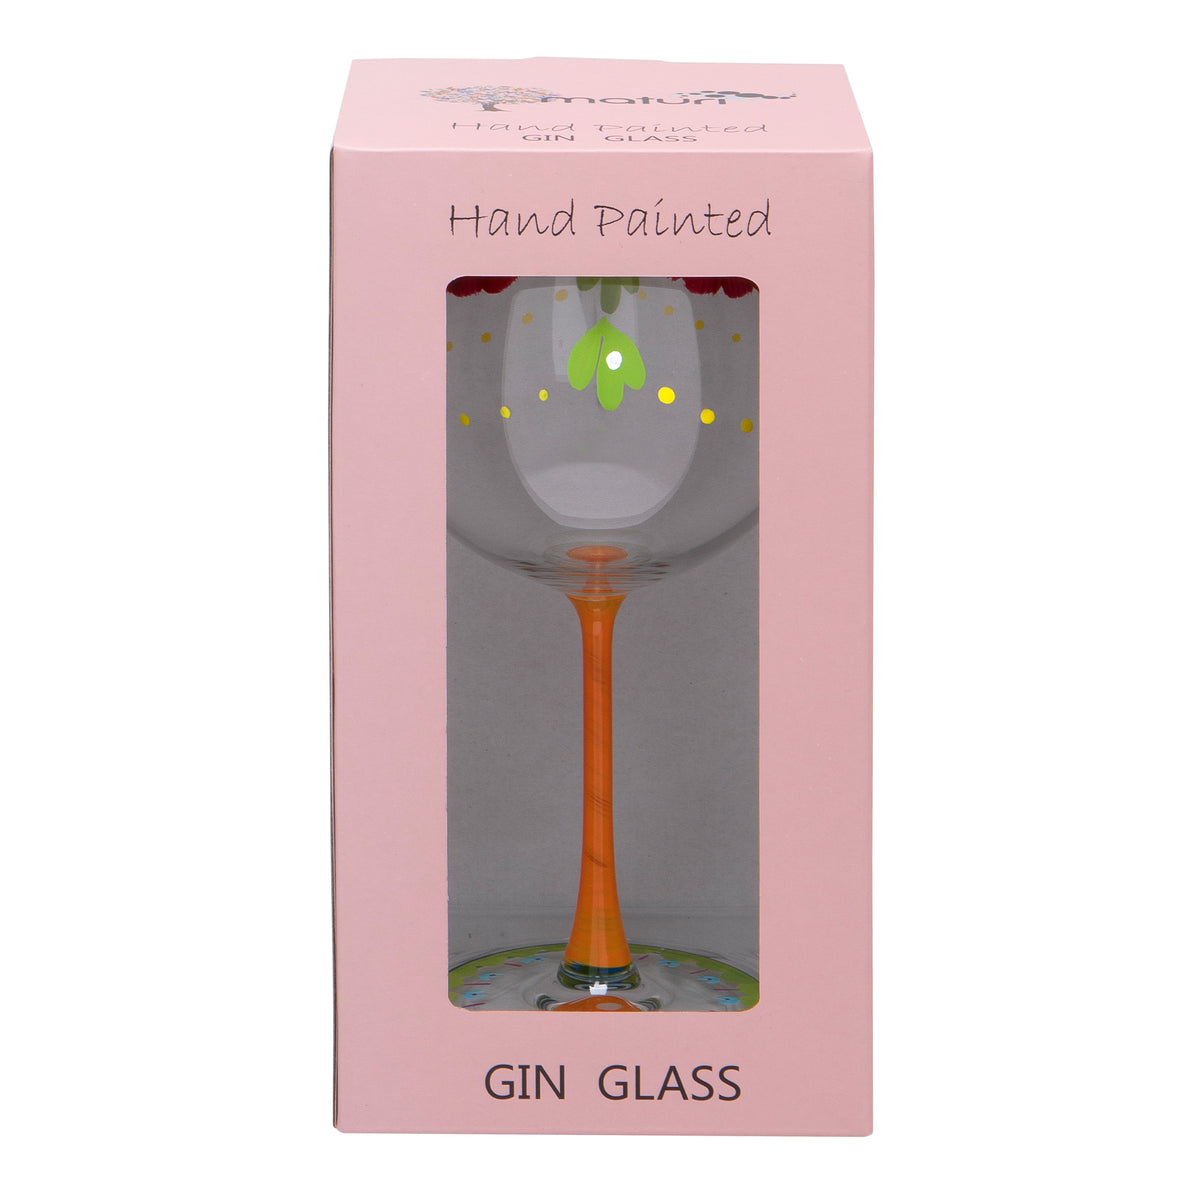 Hand Painted Pattern Gin Glass